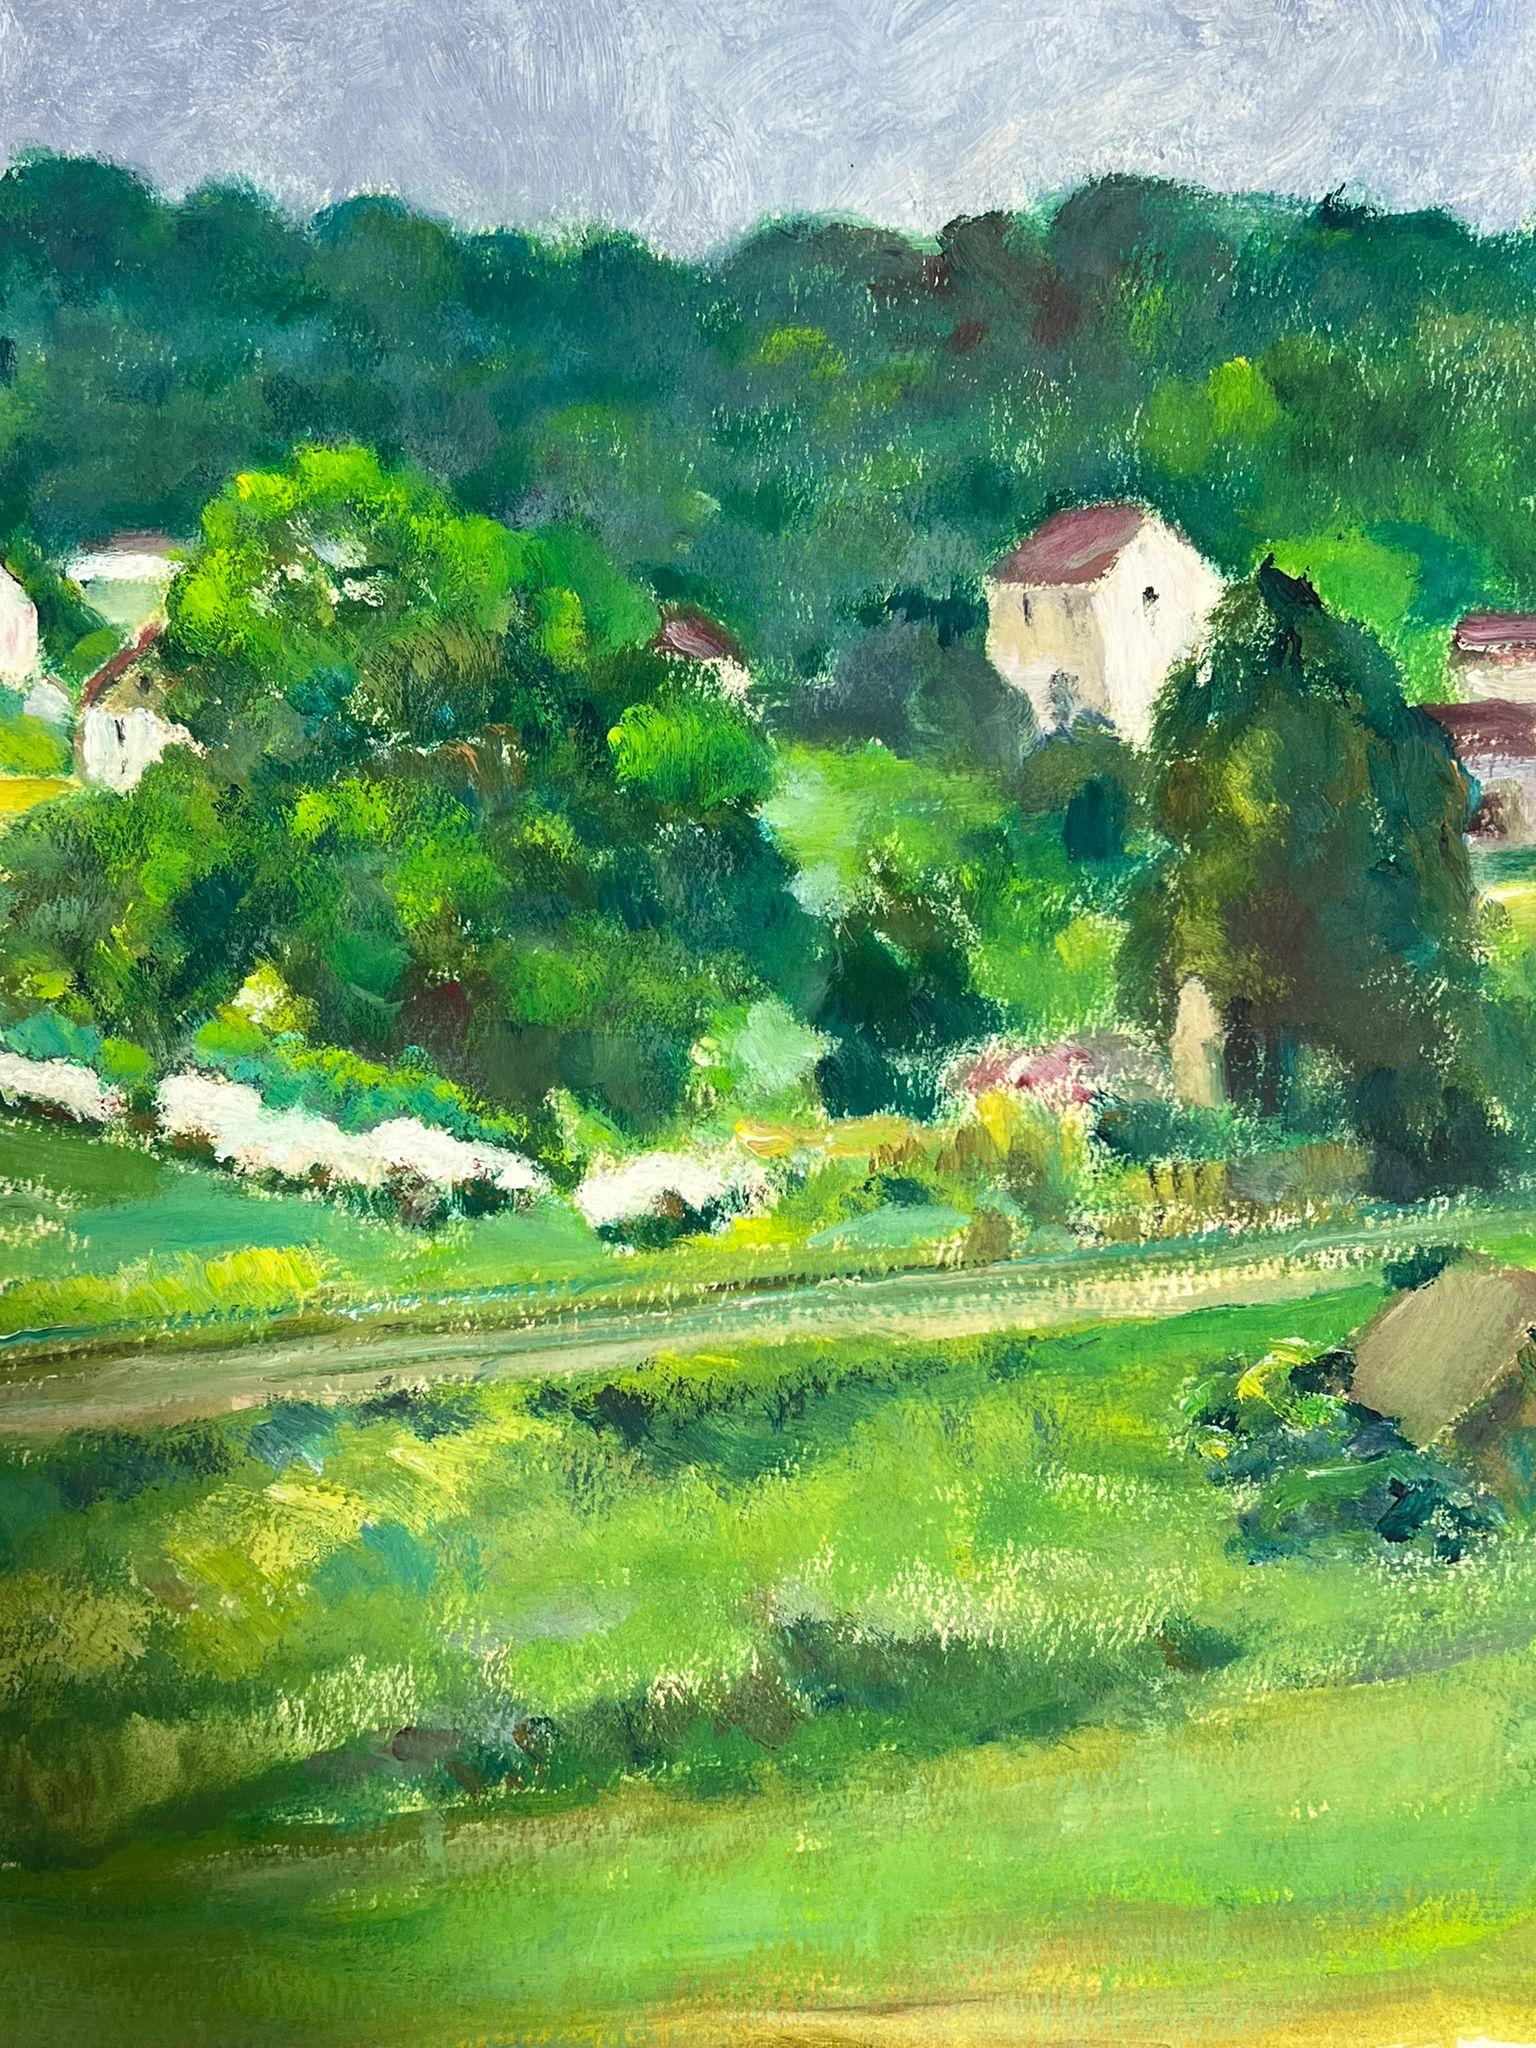 Red Roof Village In Bright Green Field Landscape's French Landscape - Impressionist Painting by Louise Alix